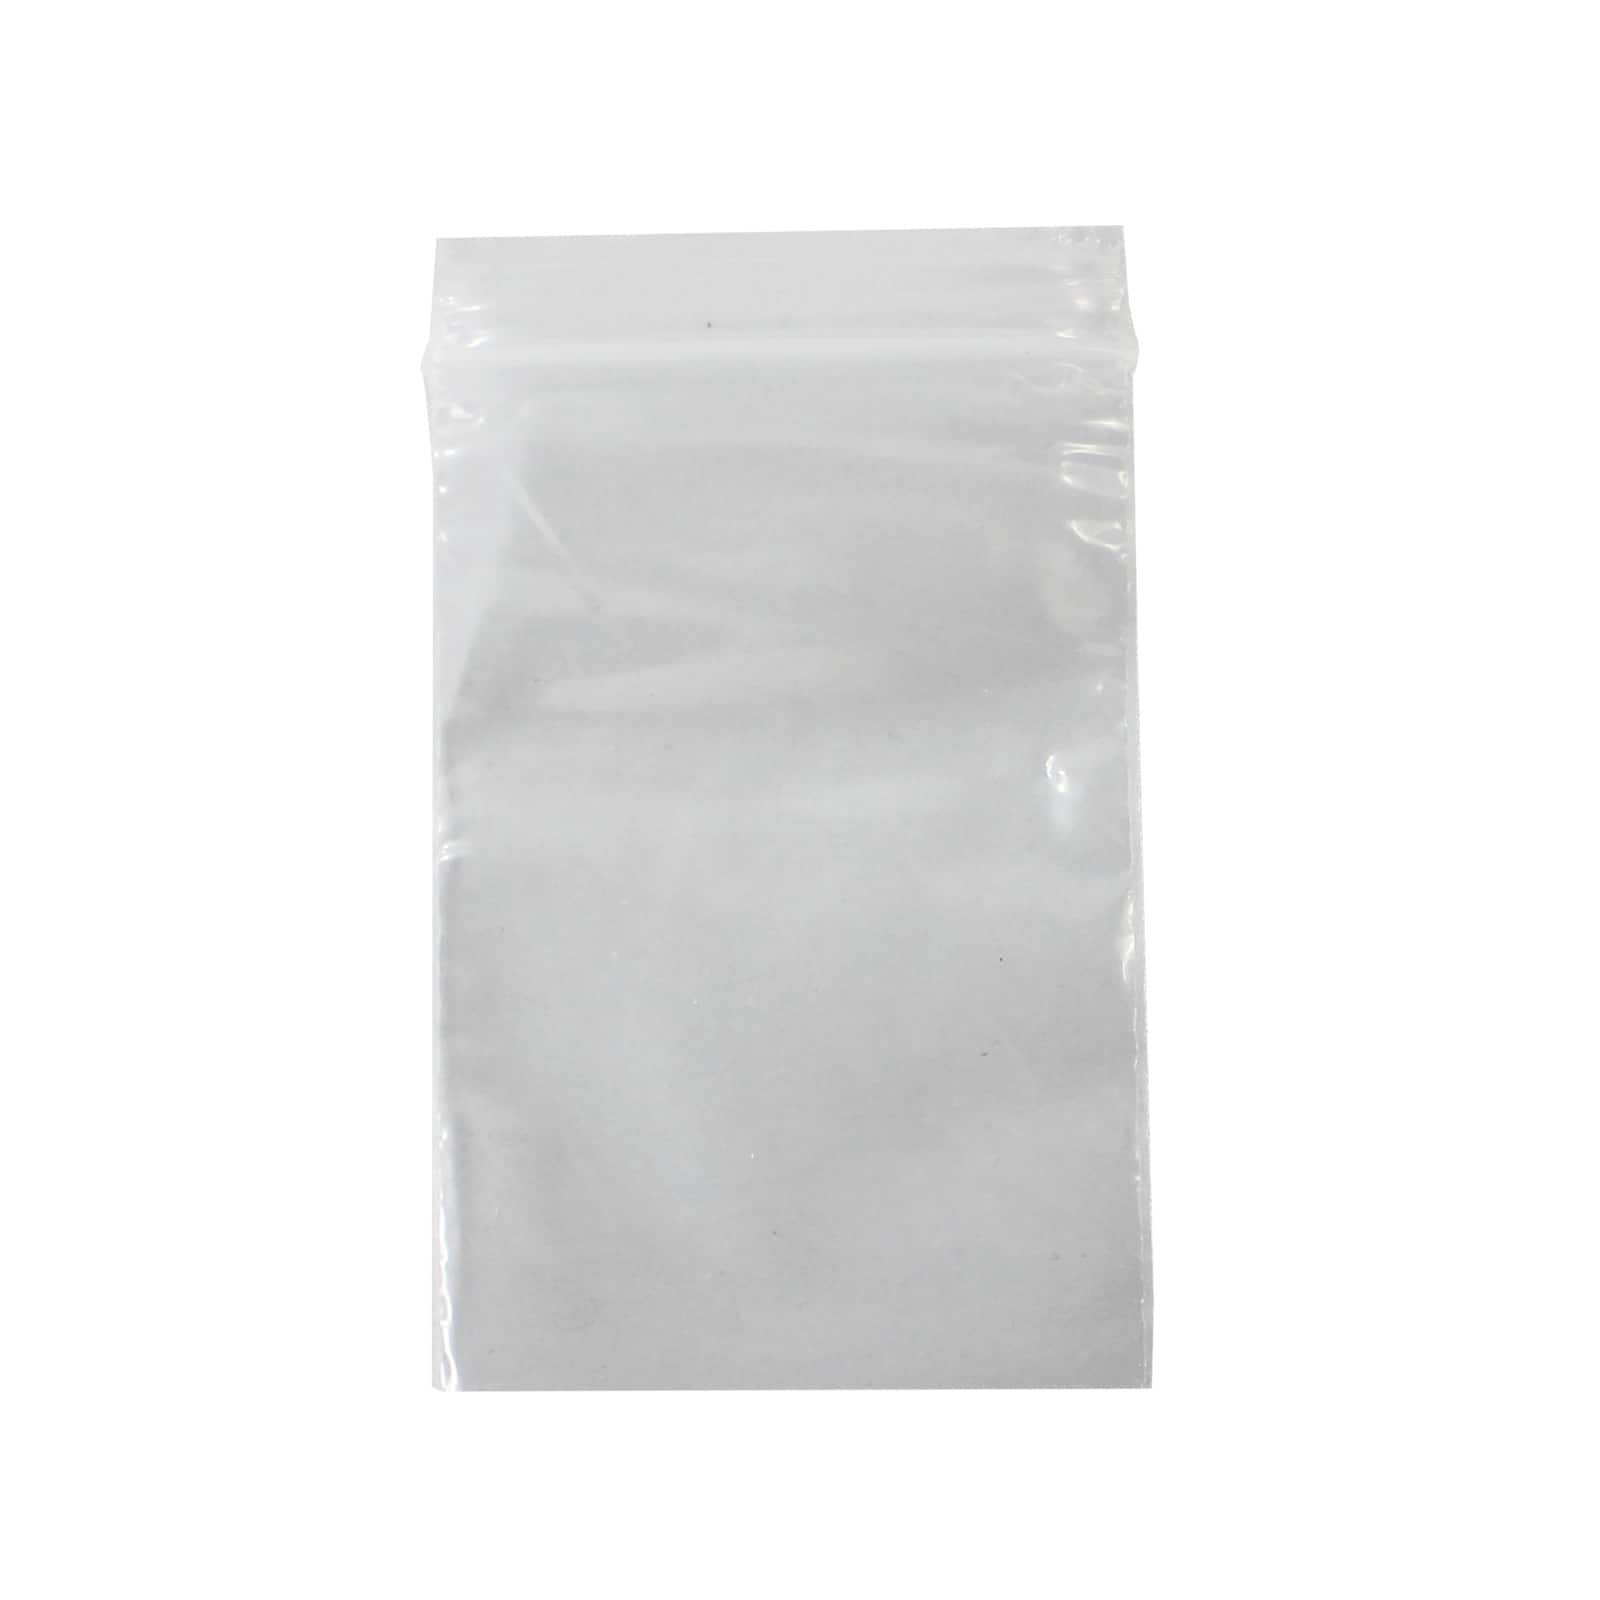 PH PandaHall 500pcs 3 Mil 2.3x1.5 Inch Clear Resealable Zipper Bags Small Sealed Storage Bags Zip Lock Bags Seal Top Bag for Beads Candy Earrings Jewelry Packaging 